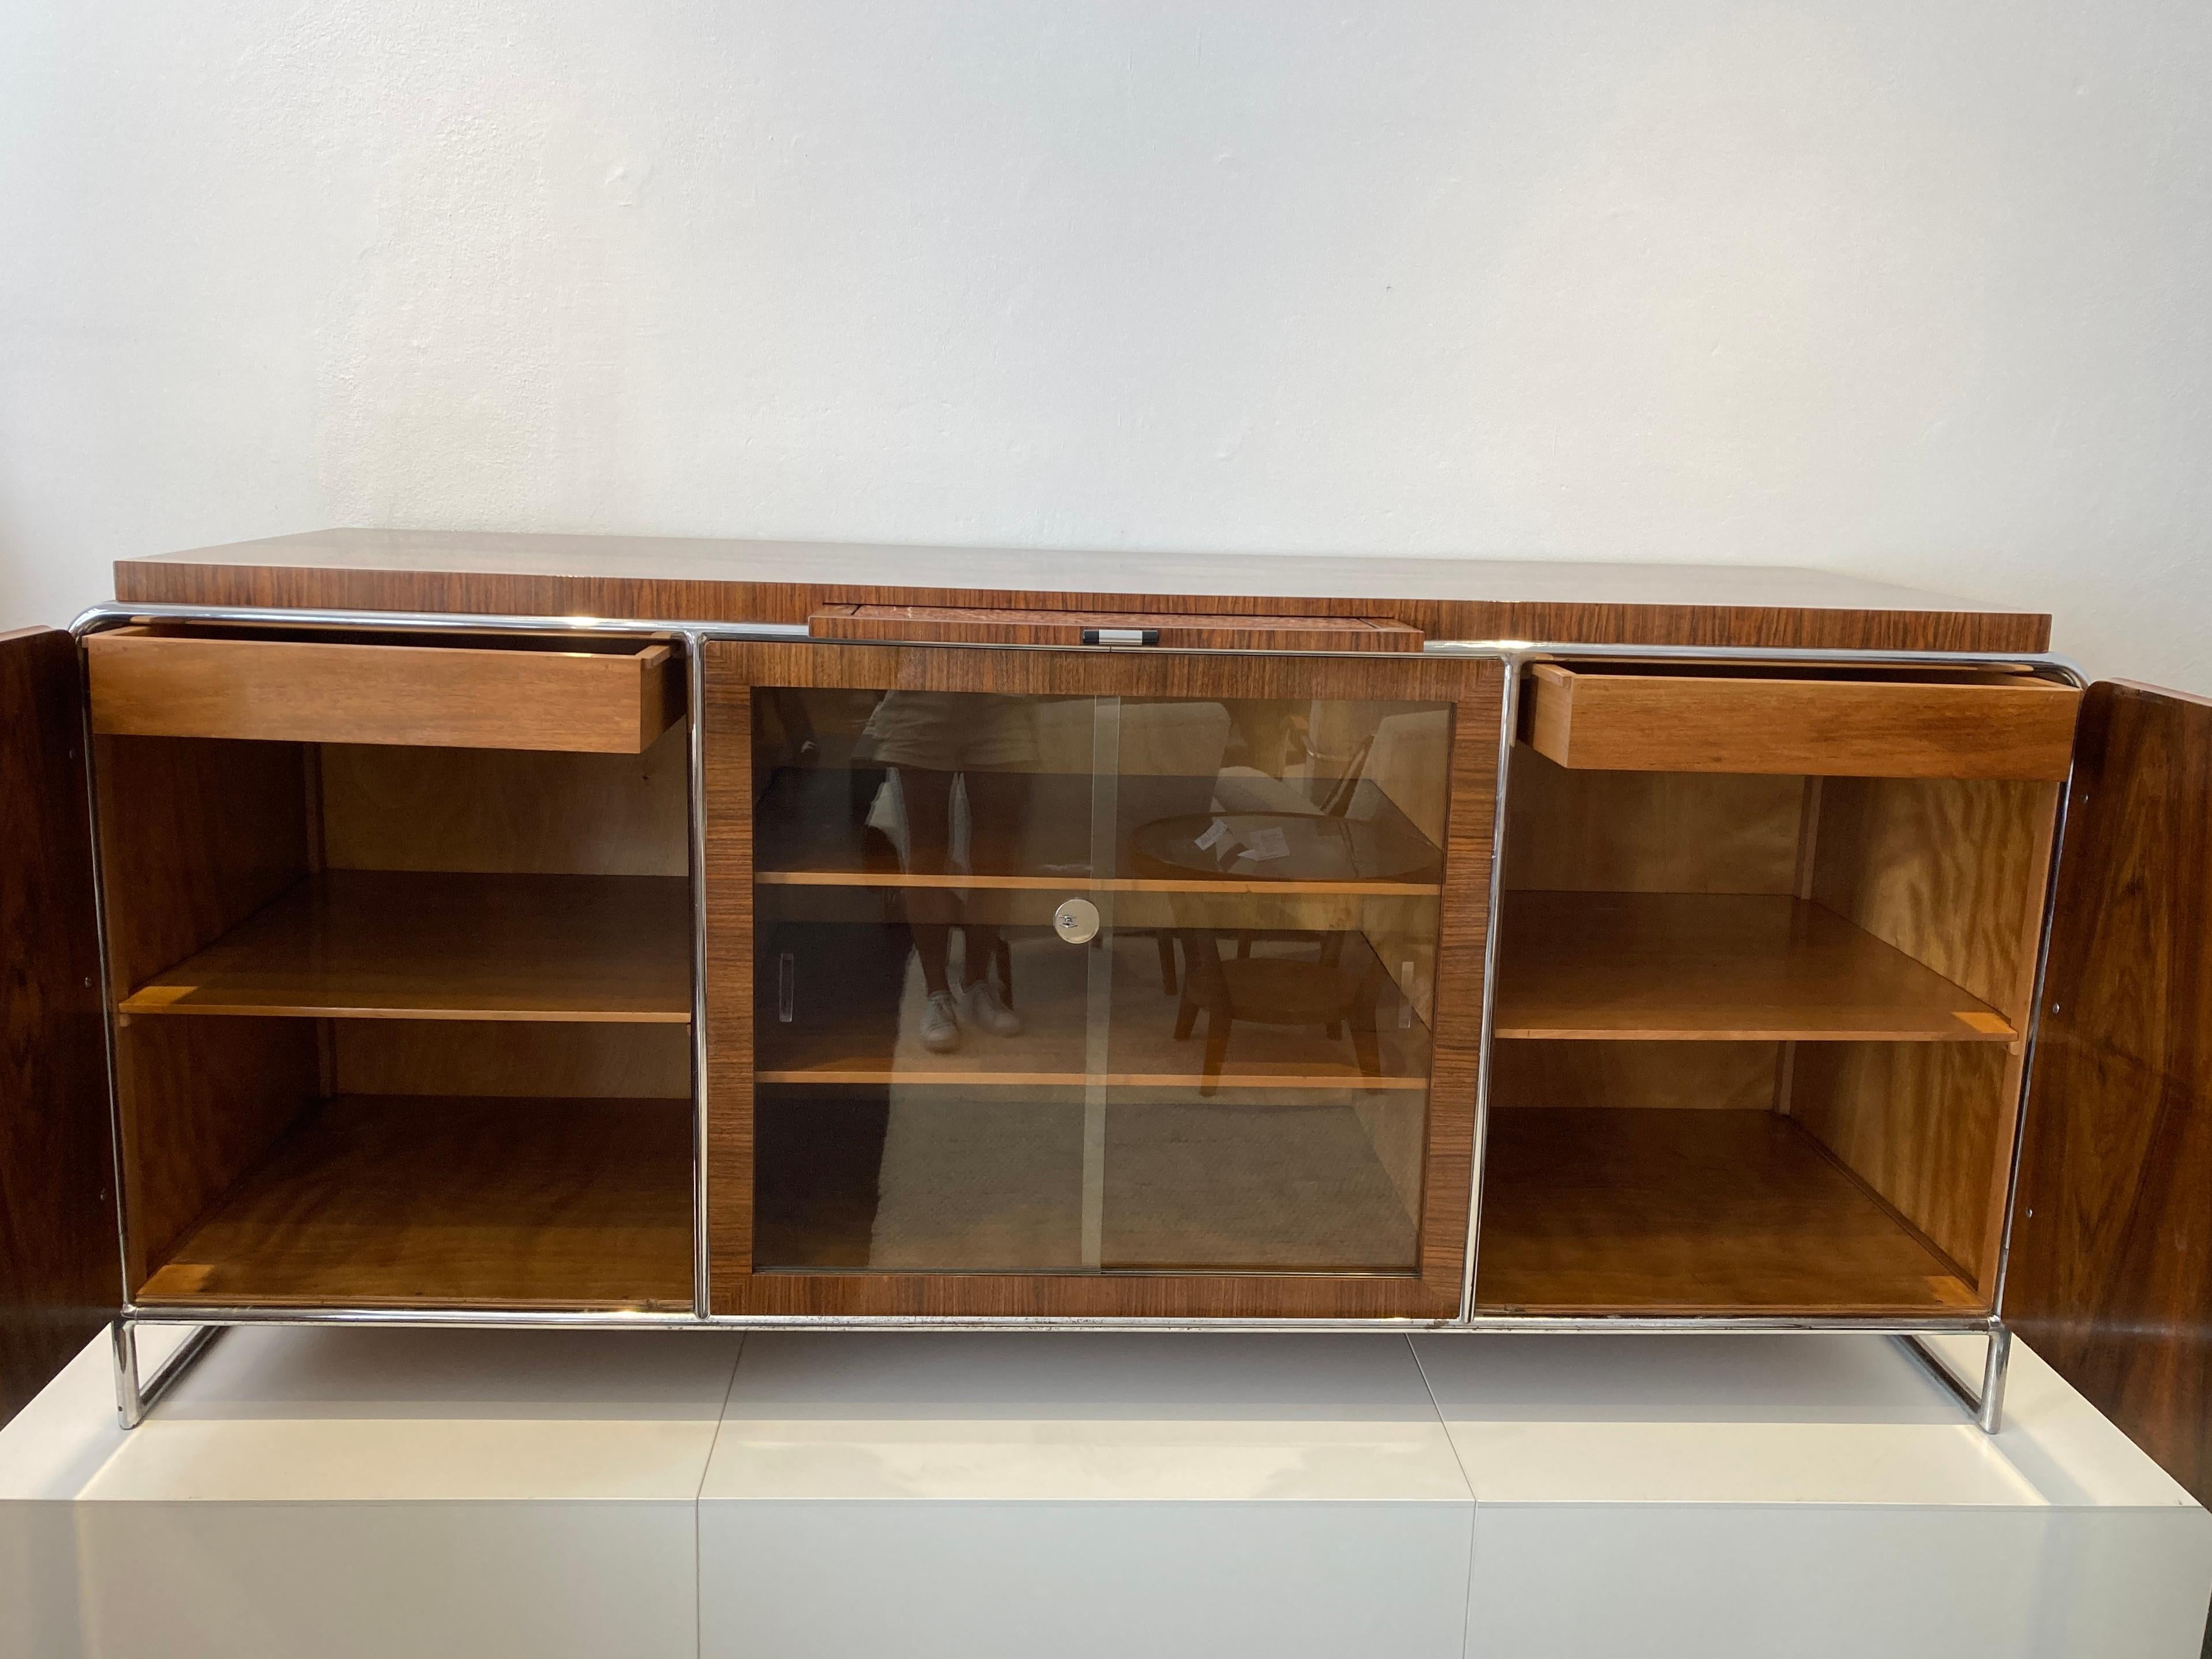 This big walnut veneered Sideboard B - 104 by H.J. Hagemann for Thonet in the 1930s has been repainted by us and the original steel tube has been polished. In the middle is the old pull-out marble slab. Original Thonet marking plate
A rarely found